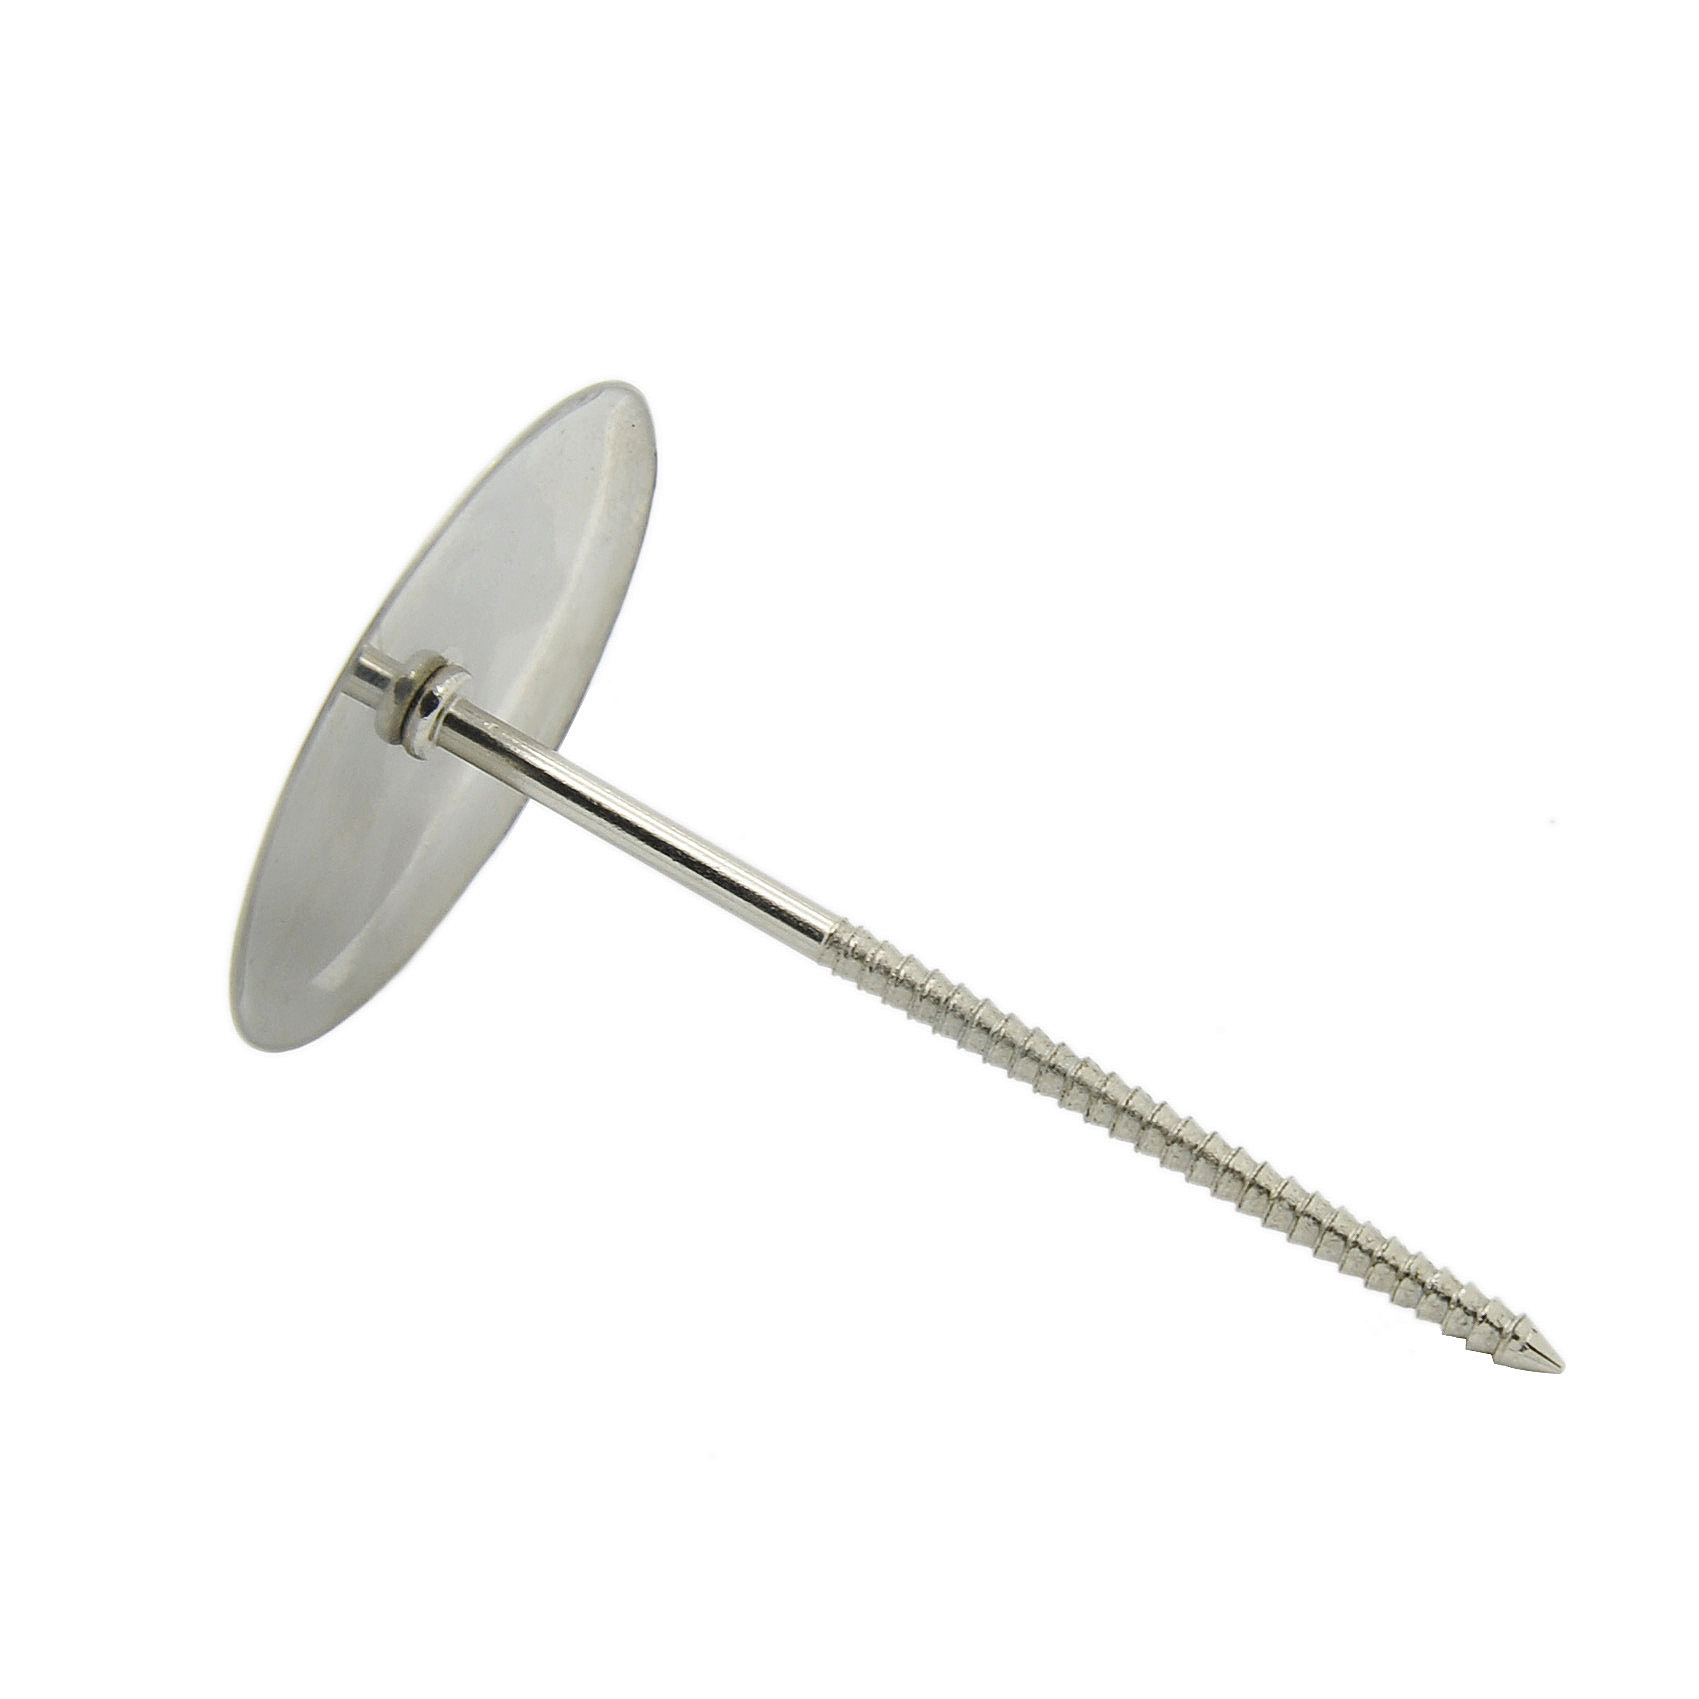 HB0179 small stainless steel cake decorating flower nail#7 pastry tool